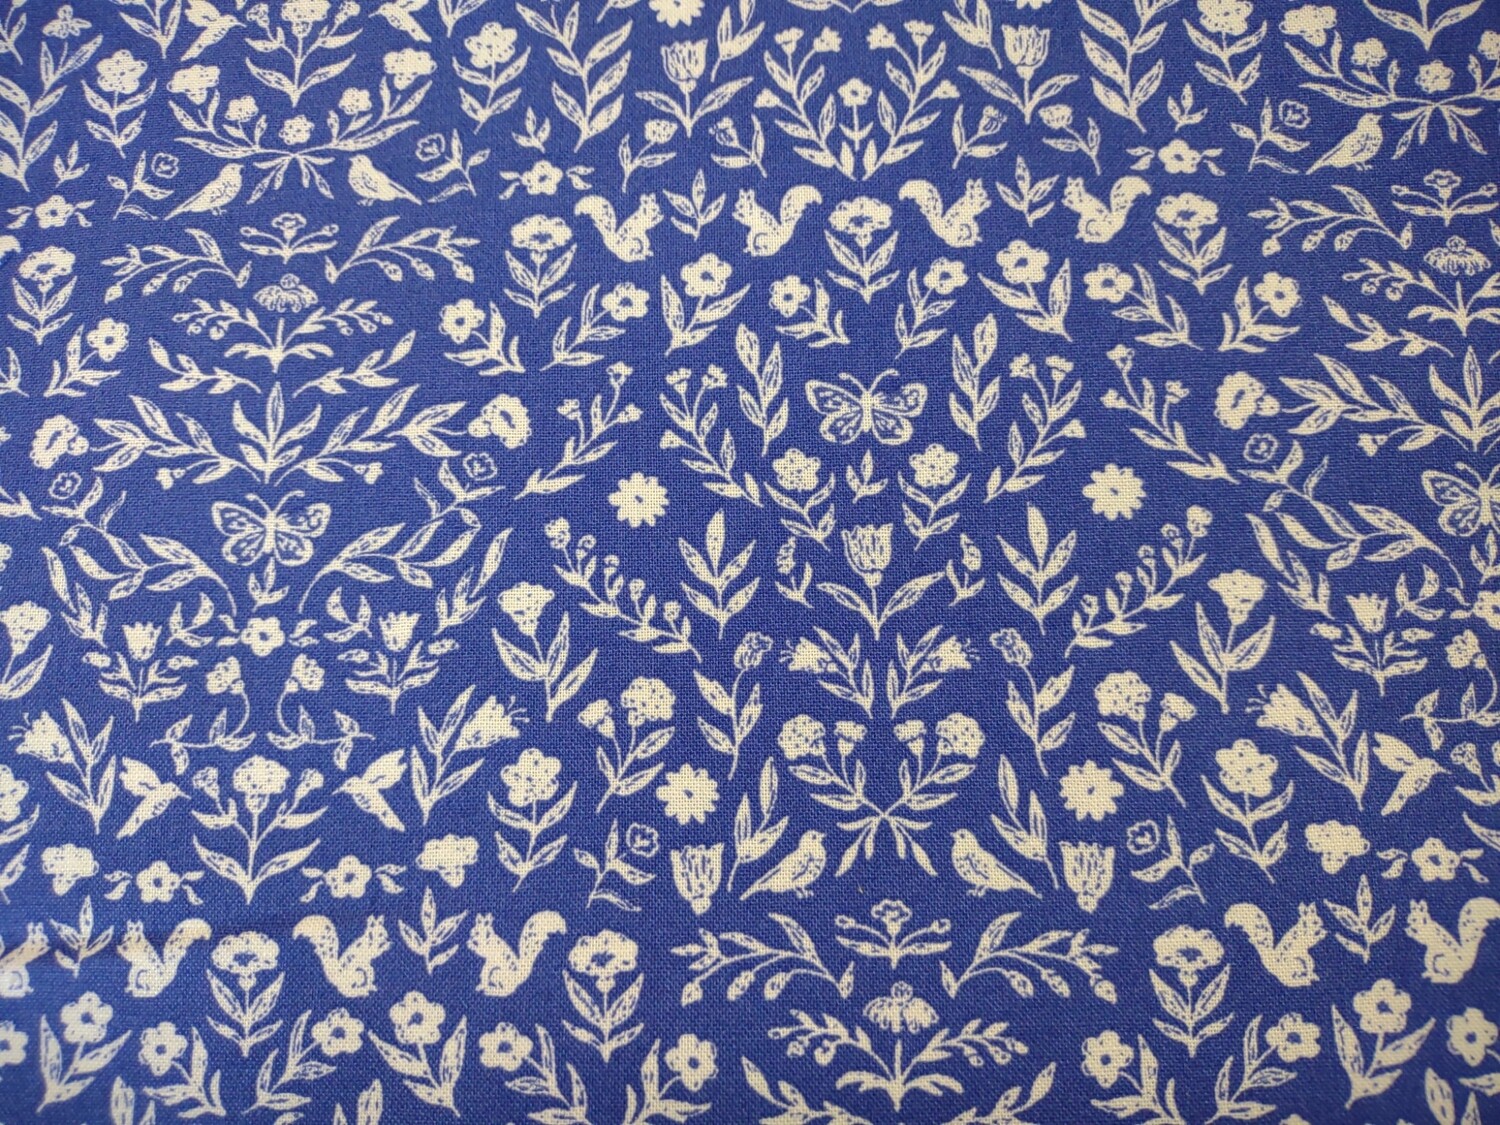 Blue Floral/Butterfly Print Fabric